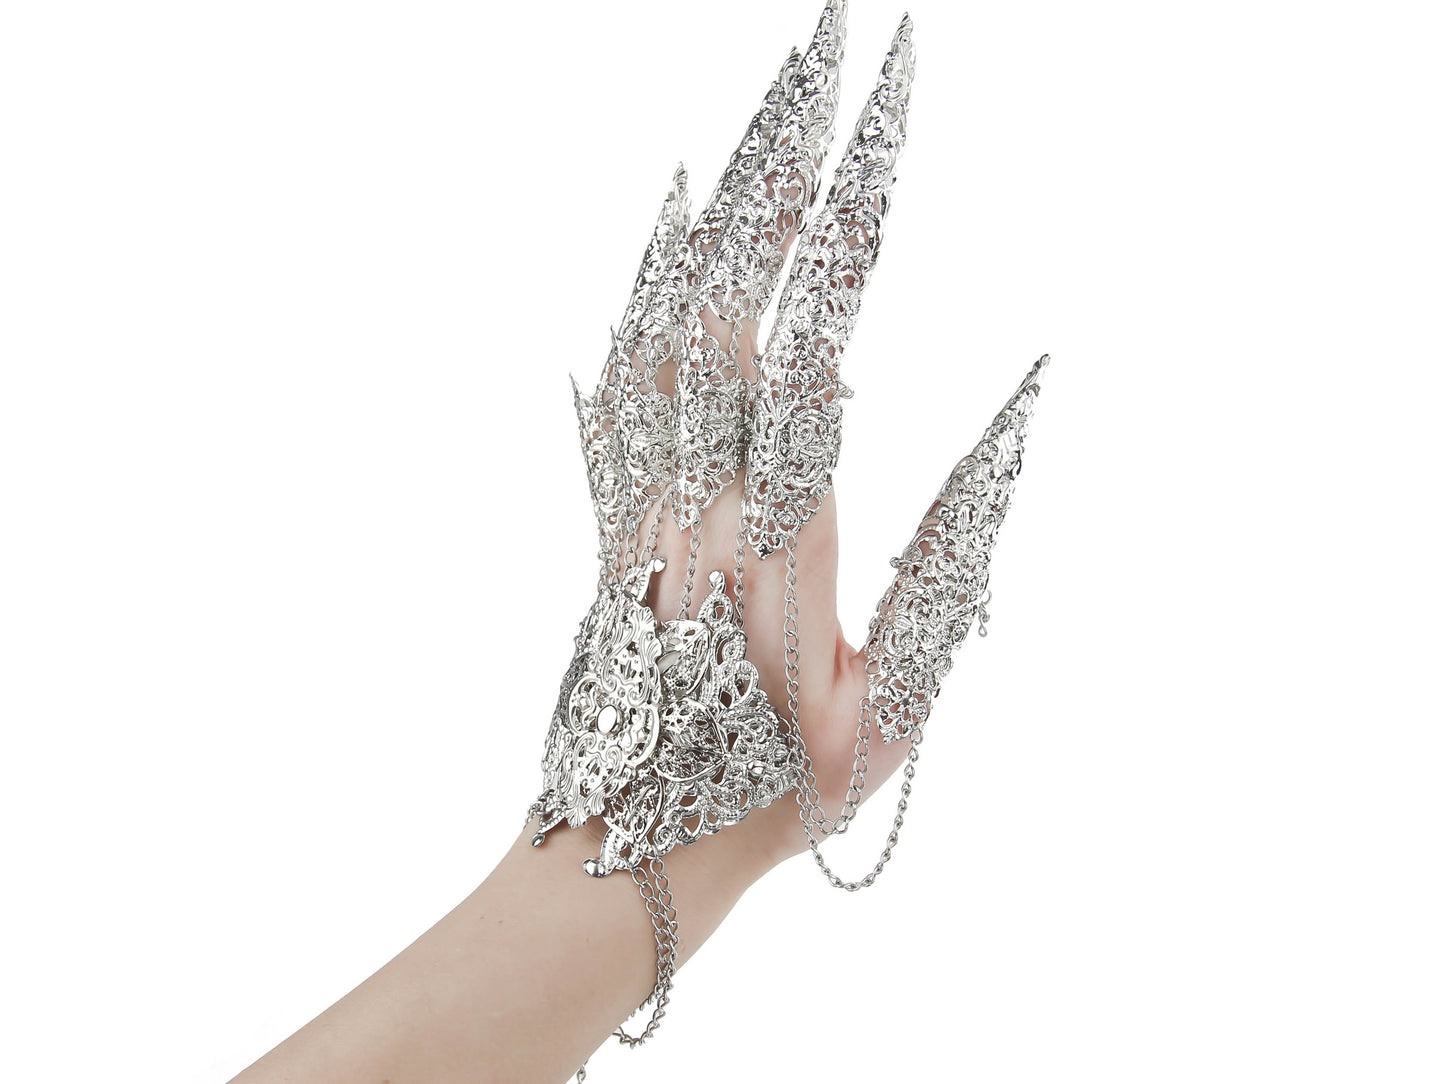 A hand is dramatically extended over a white background, showcasing Myril Jewels' silver lace finger armor, intertwined with chains, epitomizing dark-avantgarde jewelry. This bold, witchcore accessory is a gothic-chic masterpiece, ideal for Halloween, punk, and neo-gothic fashion statements, crafted with the sophisticated whimsy of Gothic Lolita.